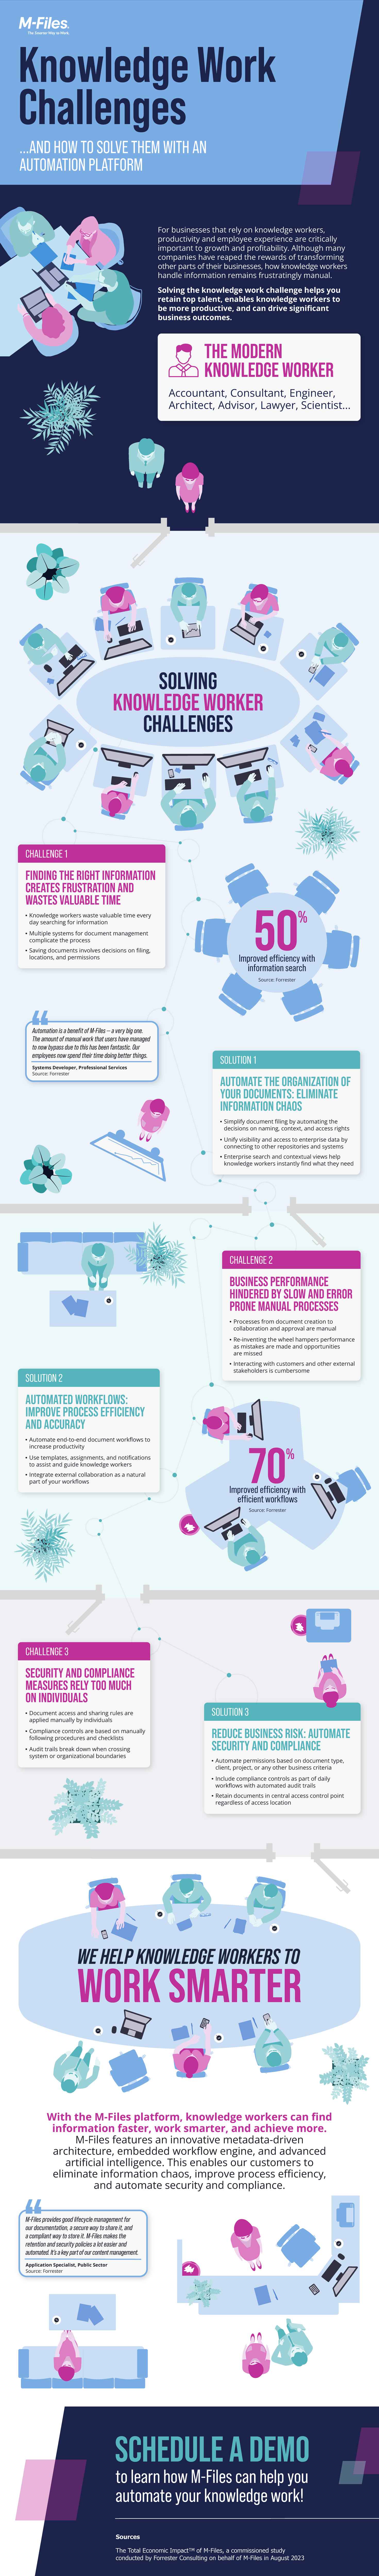 Infographic - Knowledge Work Automation - EN (ID 438473)